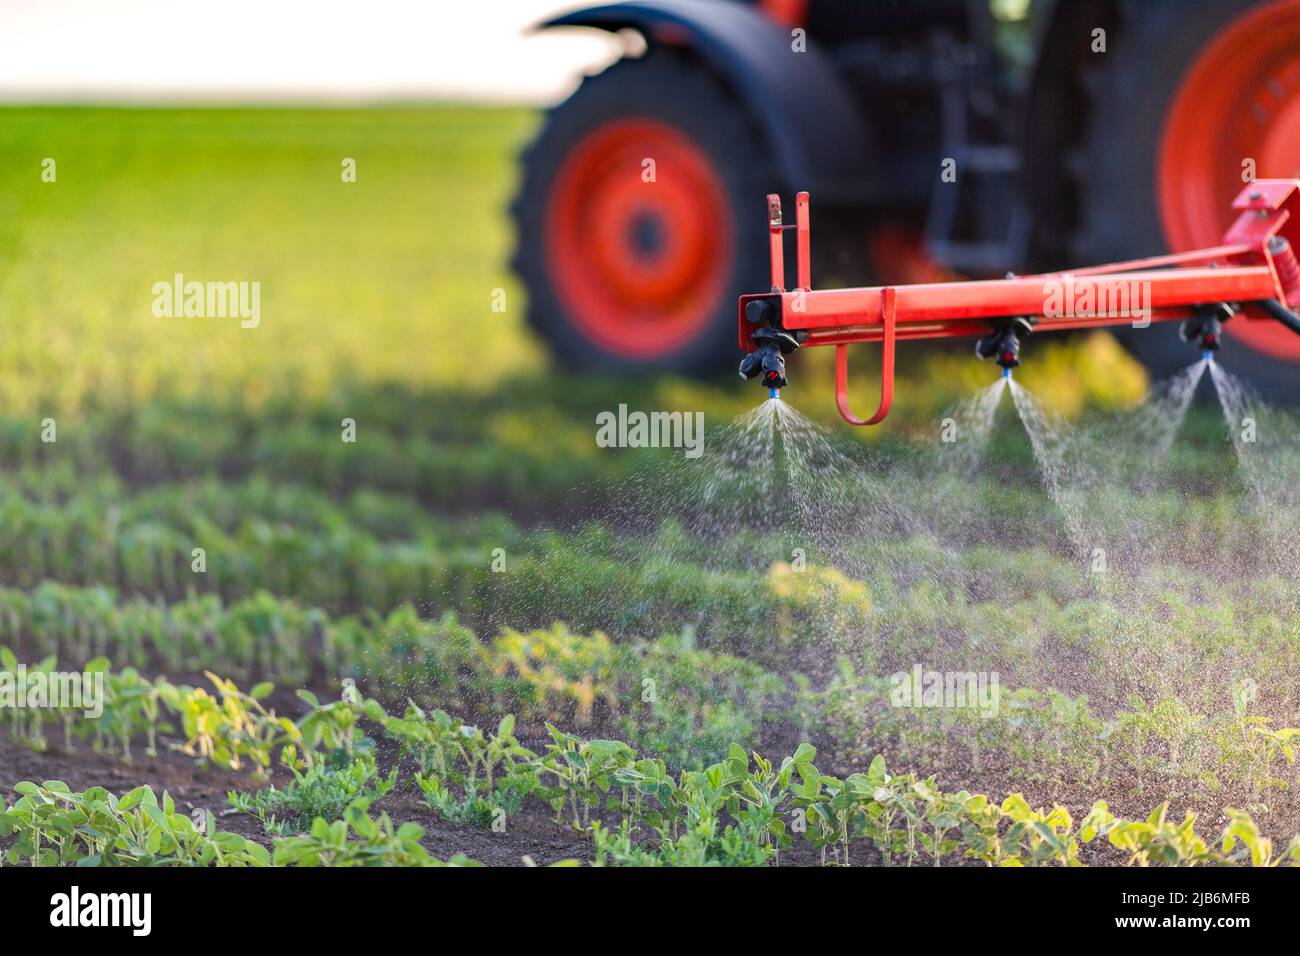 Nozzle of the tractor sprinklers sprayed.Soybean spraying. Stock Photo